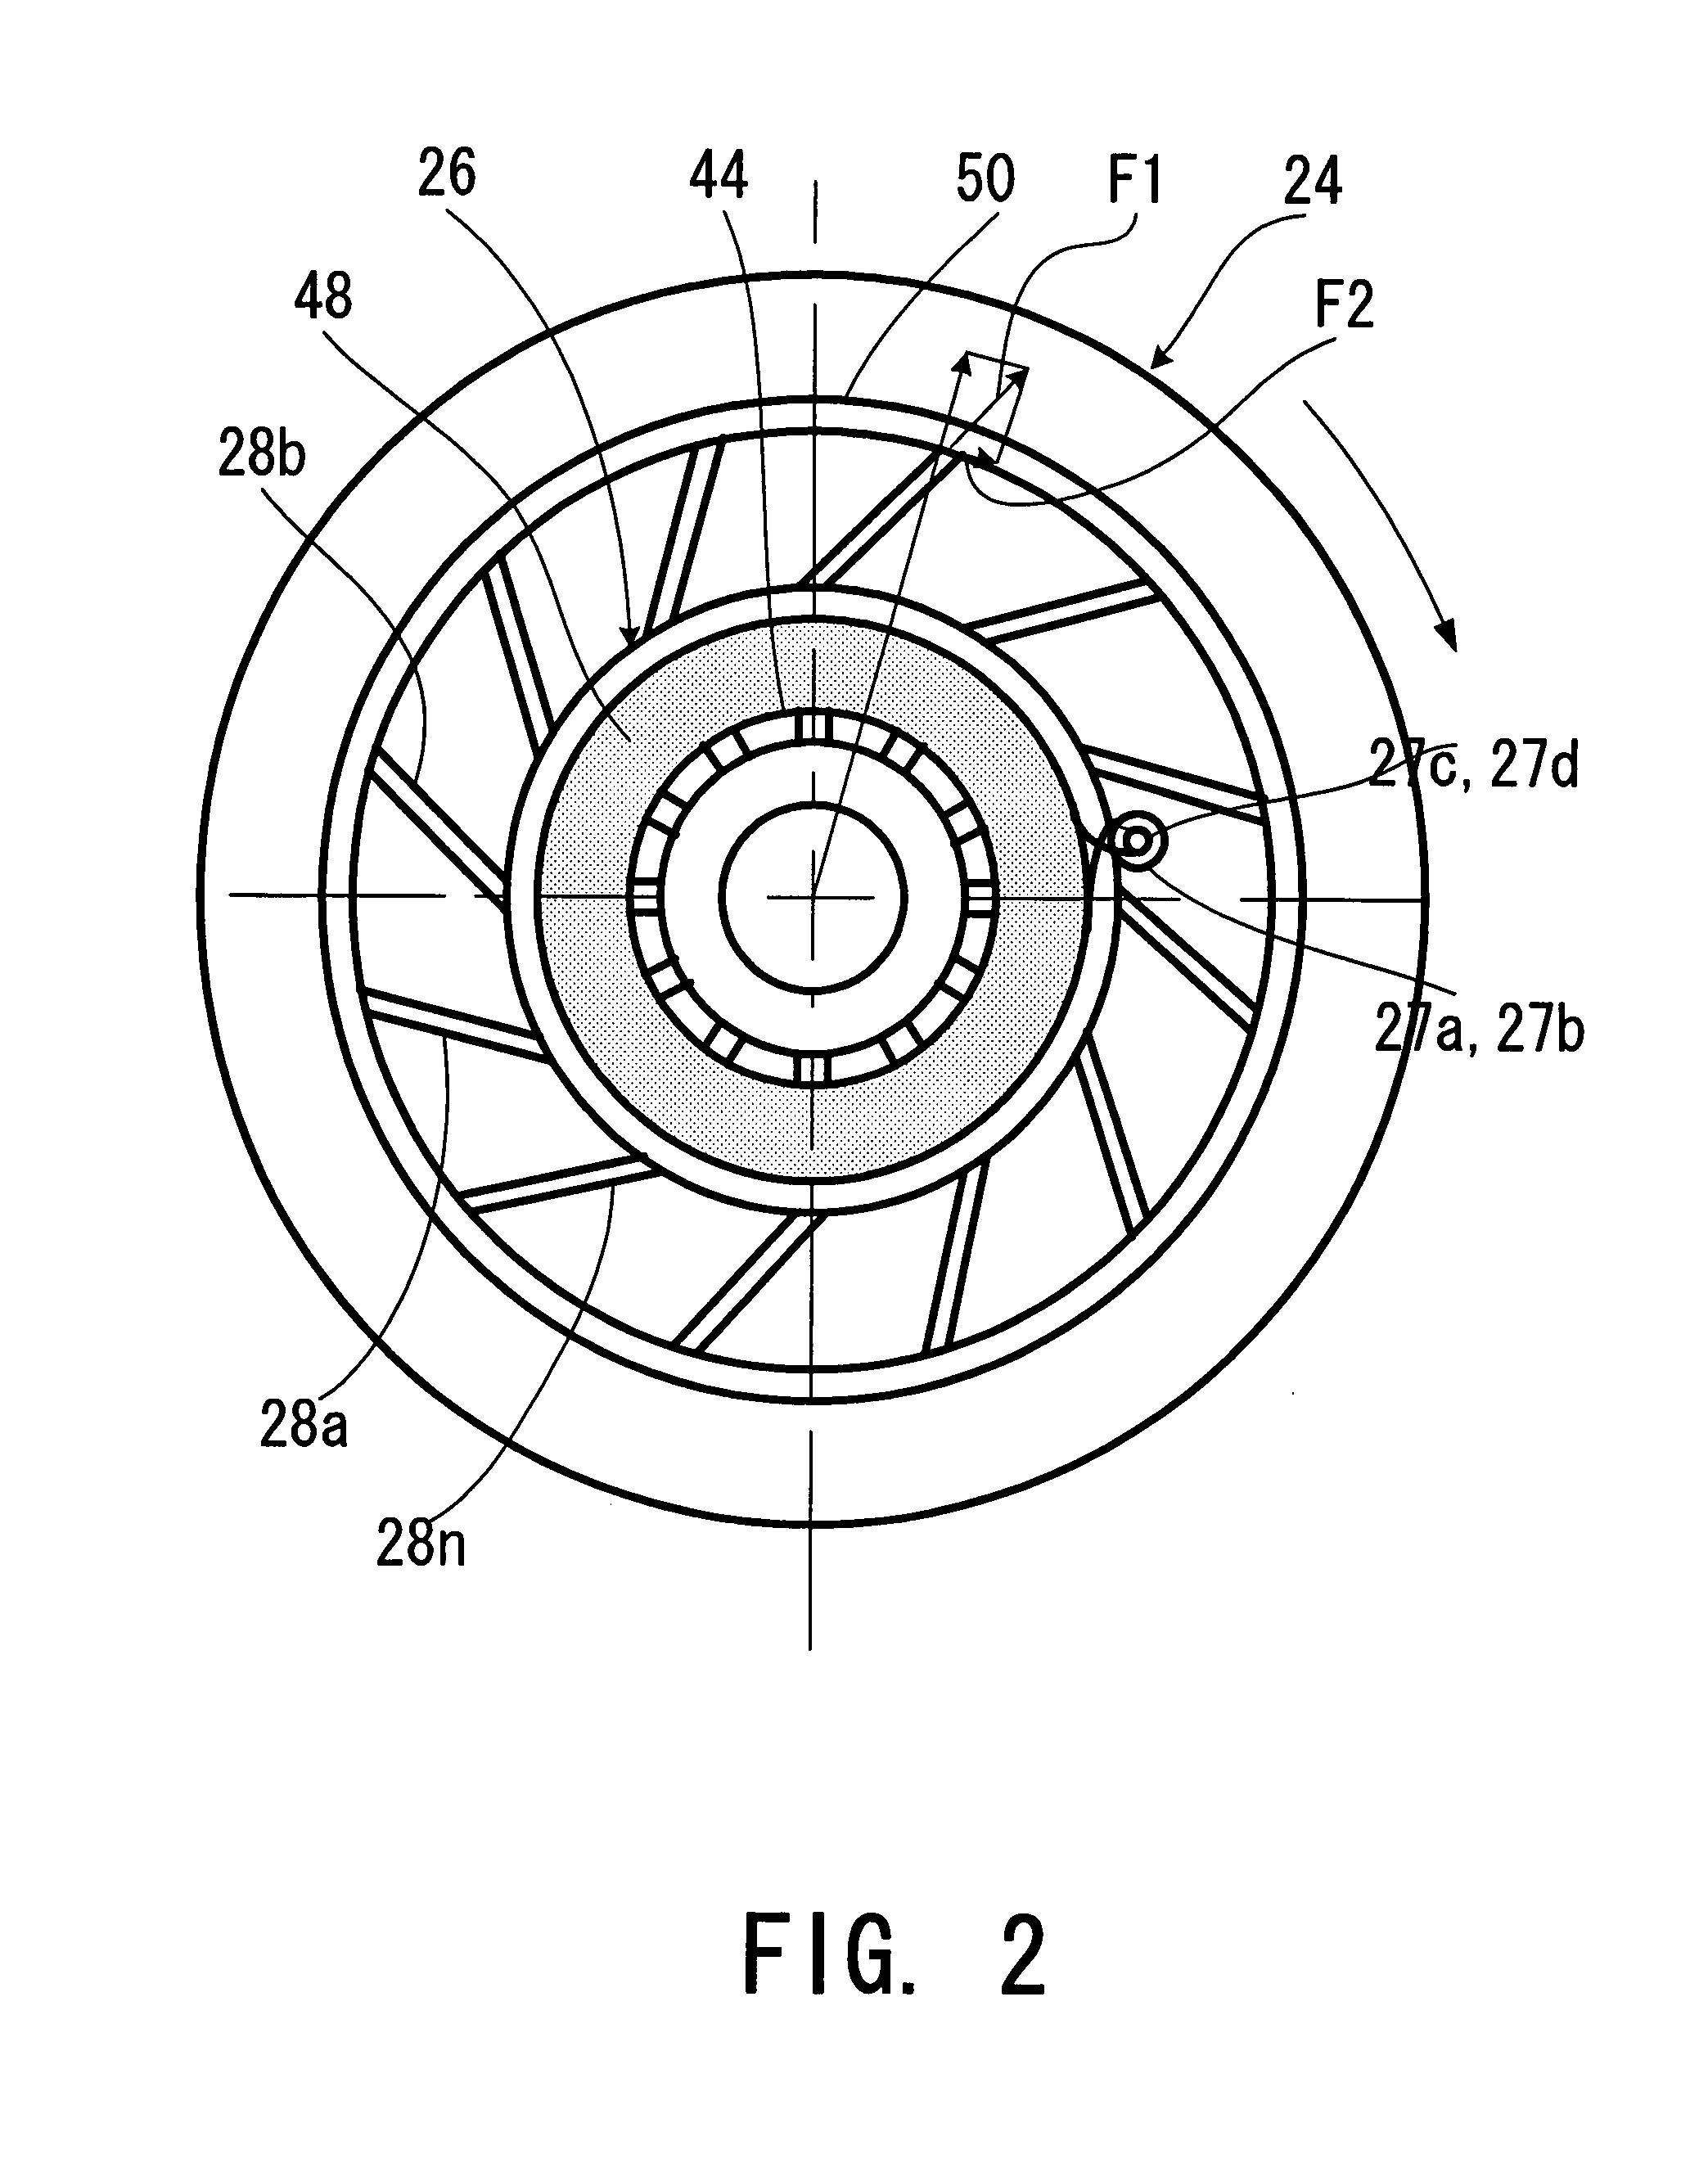 Apparatus for transforming inverse piezoelectric effect into rotary motion and method of manufacturing aforementioned apparatus